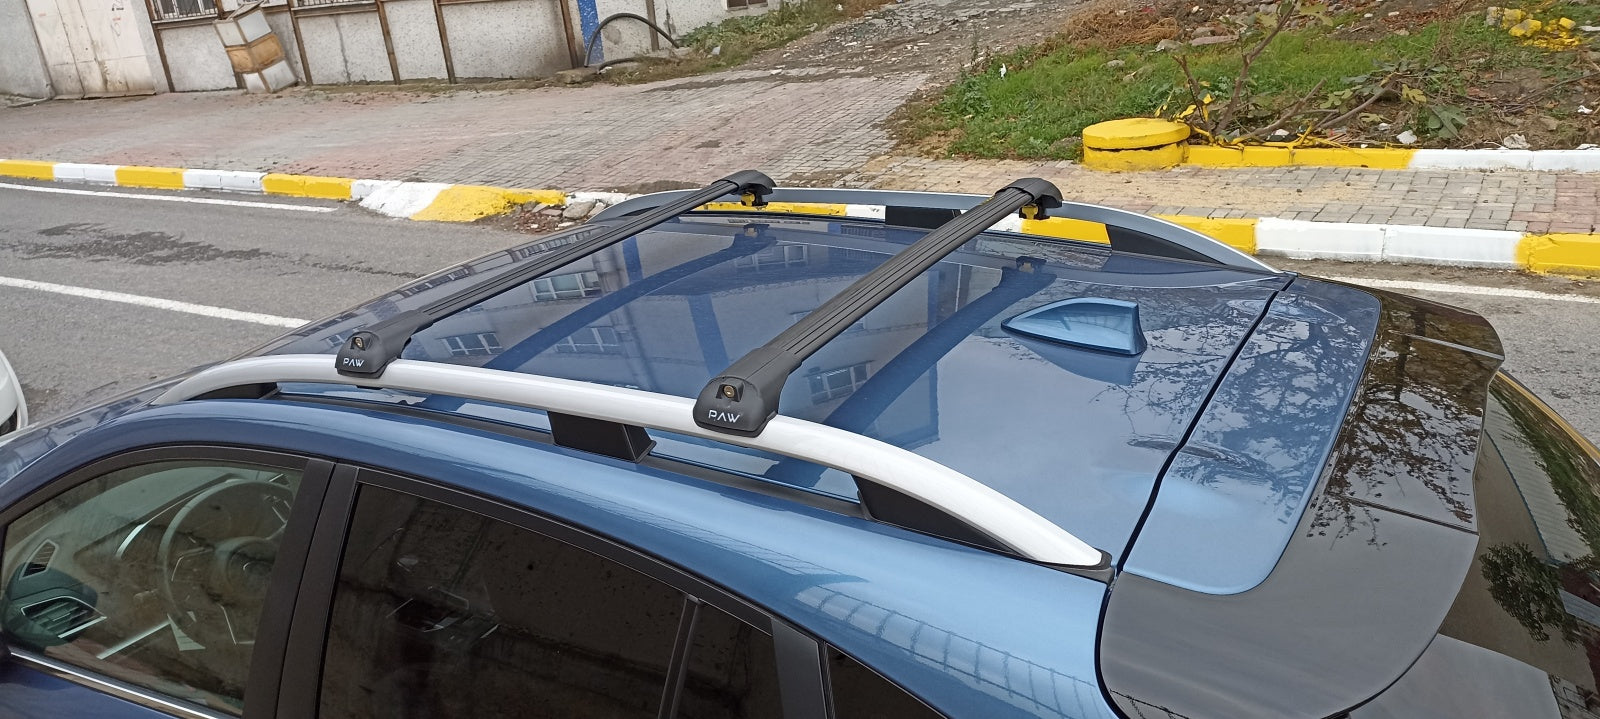 For Suzuki Escudo 2015-Up Roof Rack System Carrier Cross Bars Aluminum Lockable High Quality of Metal Bracket Black-4